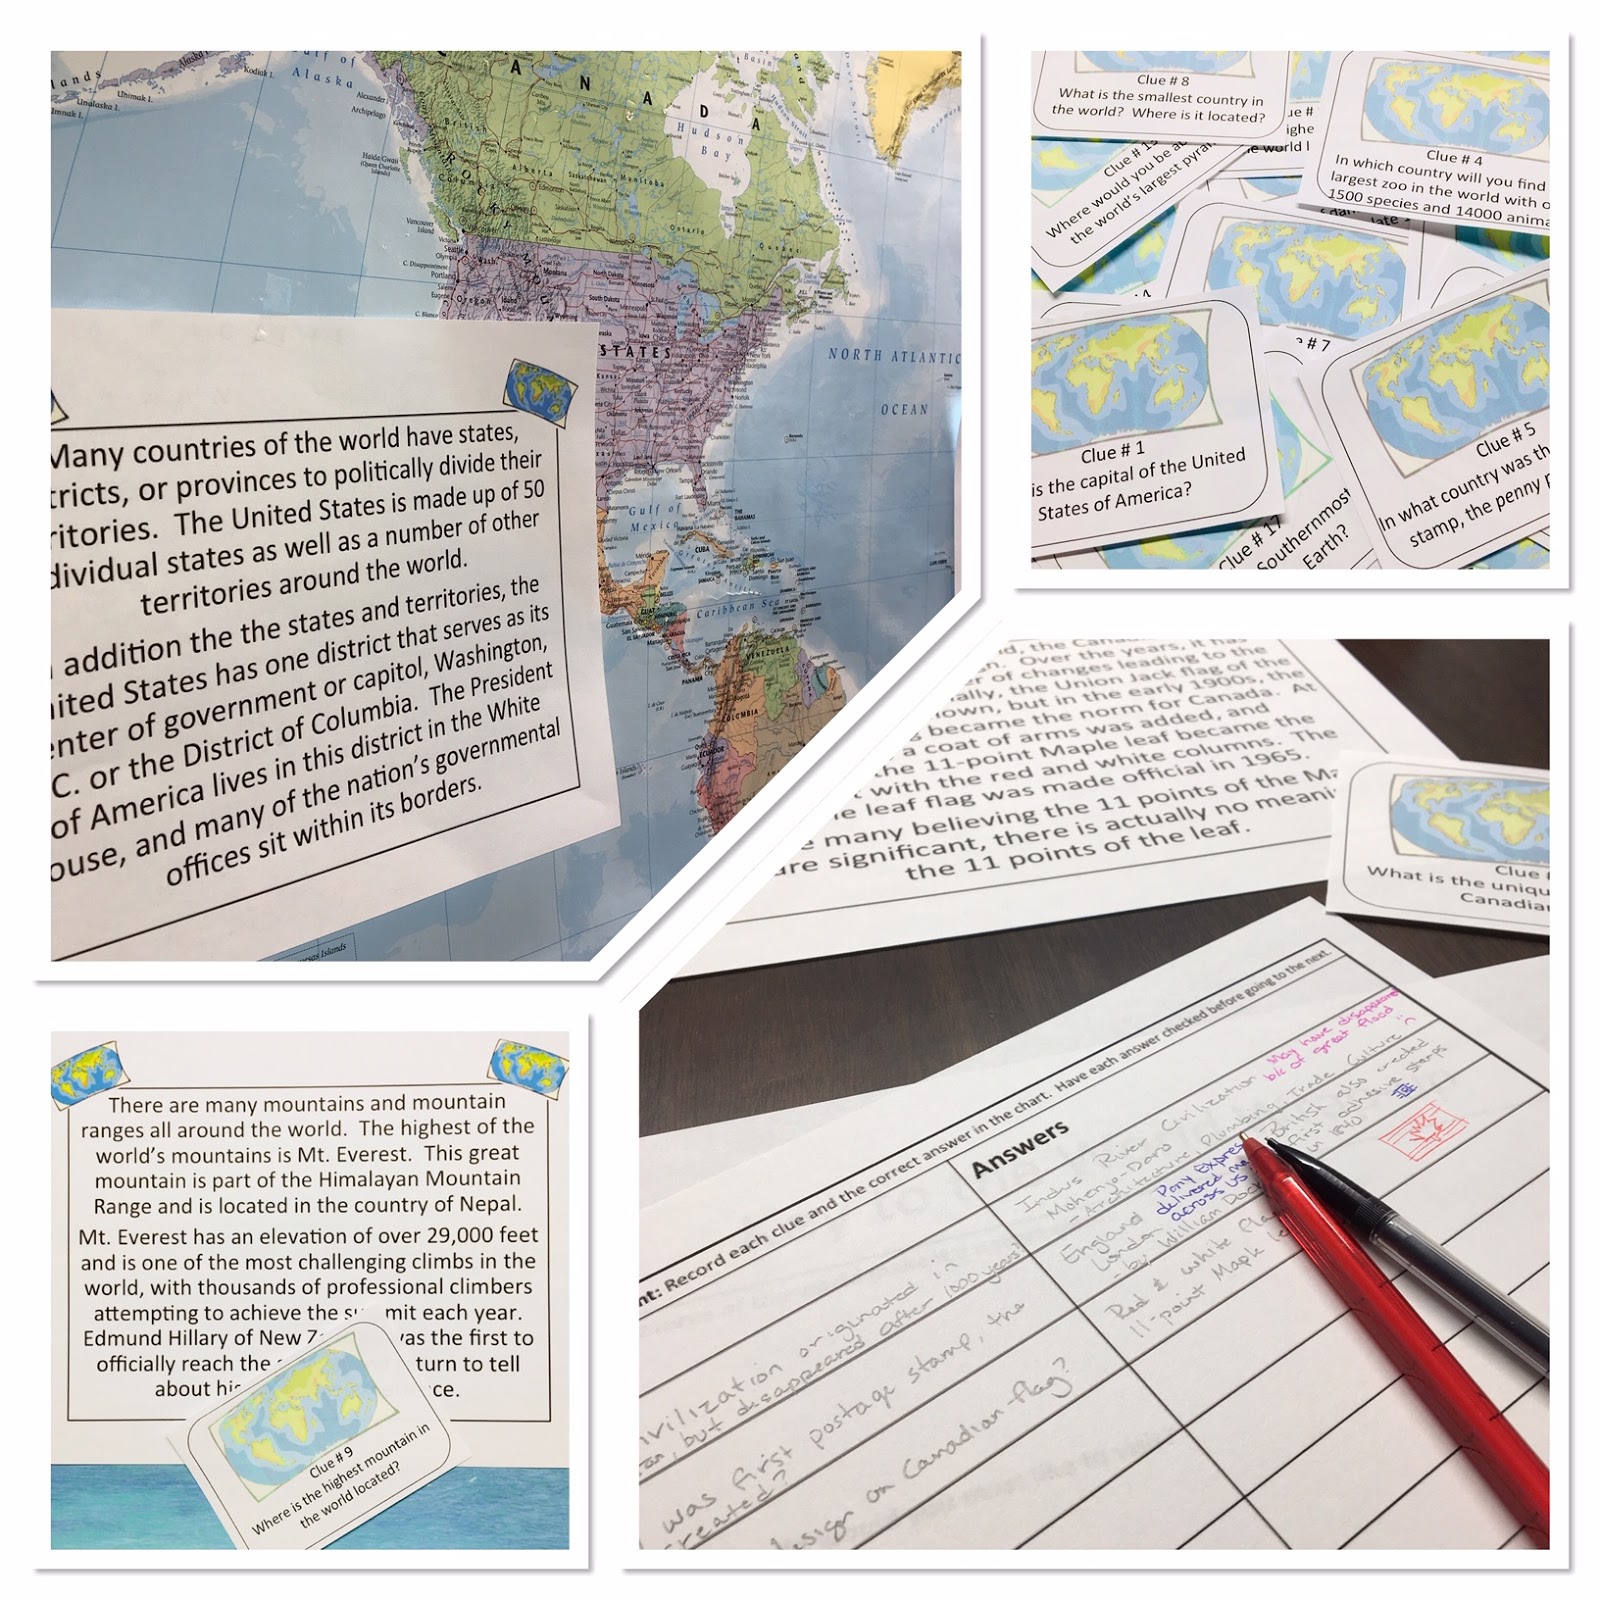 Overwhelmed by all this talk of differential learning? Too many learning styles and modifications to keep them all straight? Use ready-to-implement scavenger hunts to teach your next Social Studies lesson and address al learning styles at once! #learningstyles #scavengeforknowledge #socialstudiesscavengers